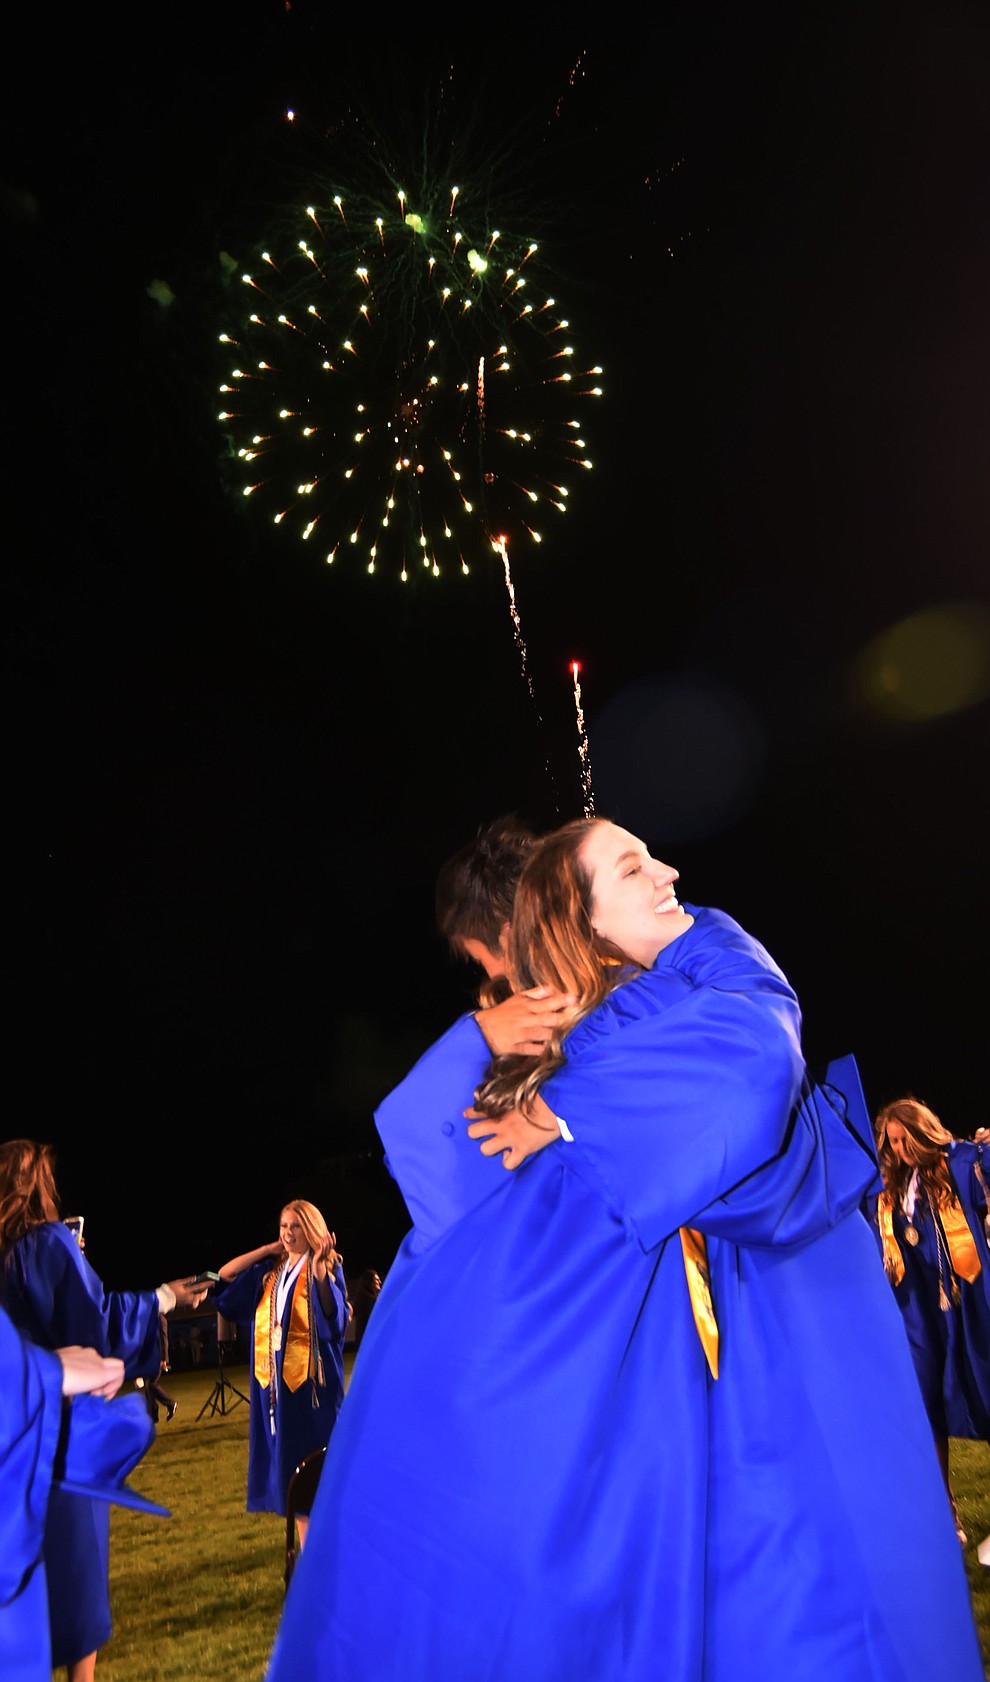 Graduates celebrate as Prescott High School holds their Commencement Ceremony for the Class of 2016 on May 27, 2016.  (Les Stukenberg/The Daily Courier)